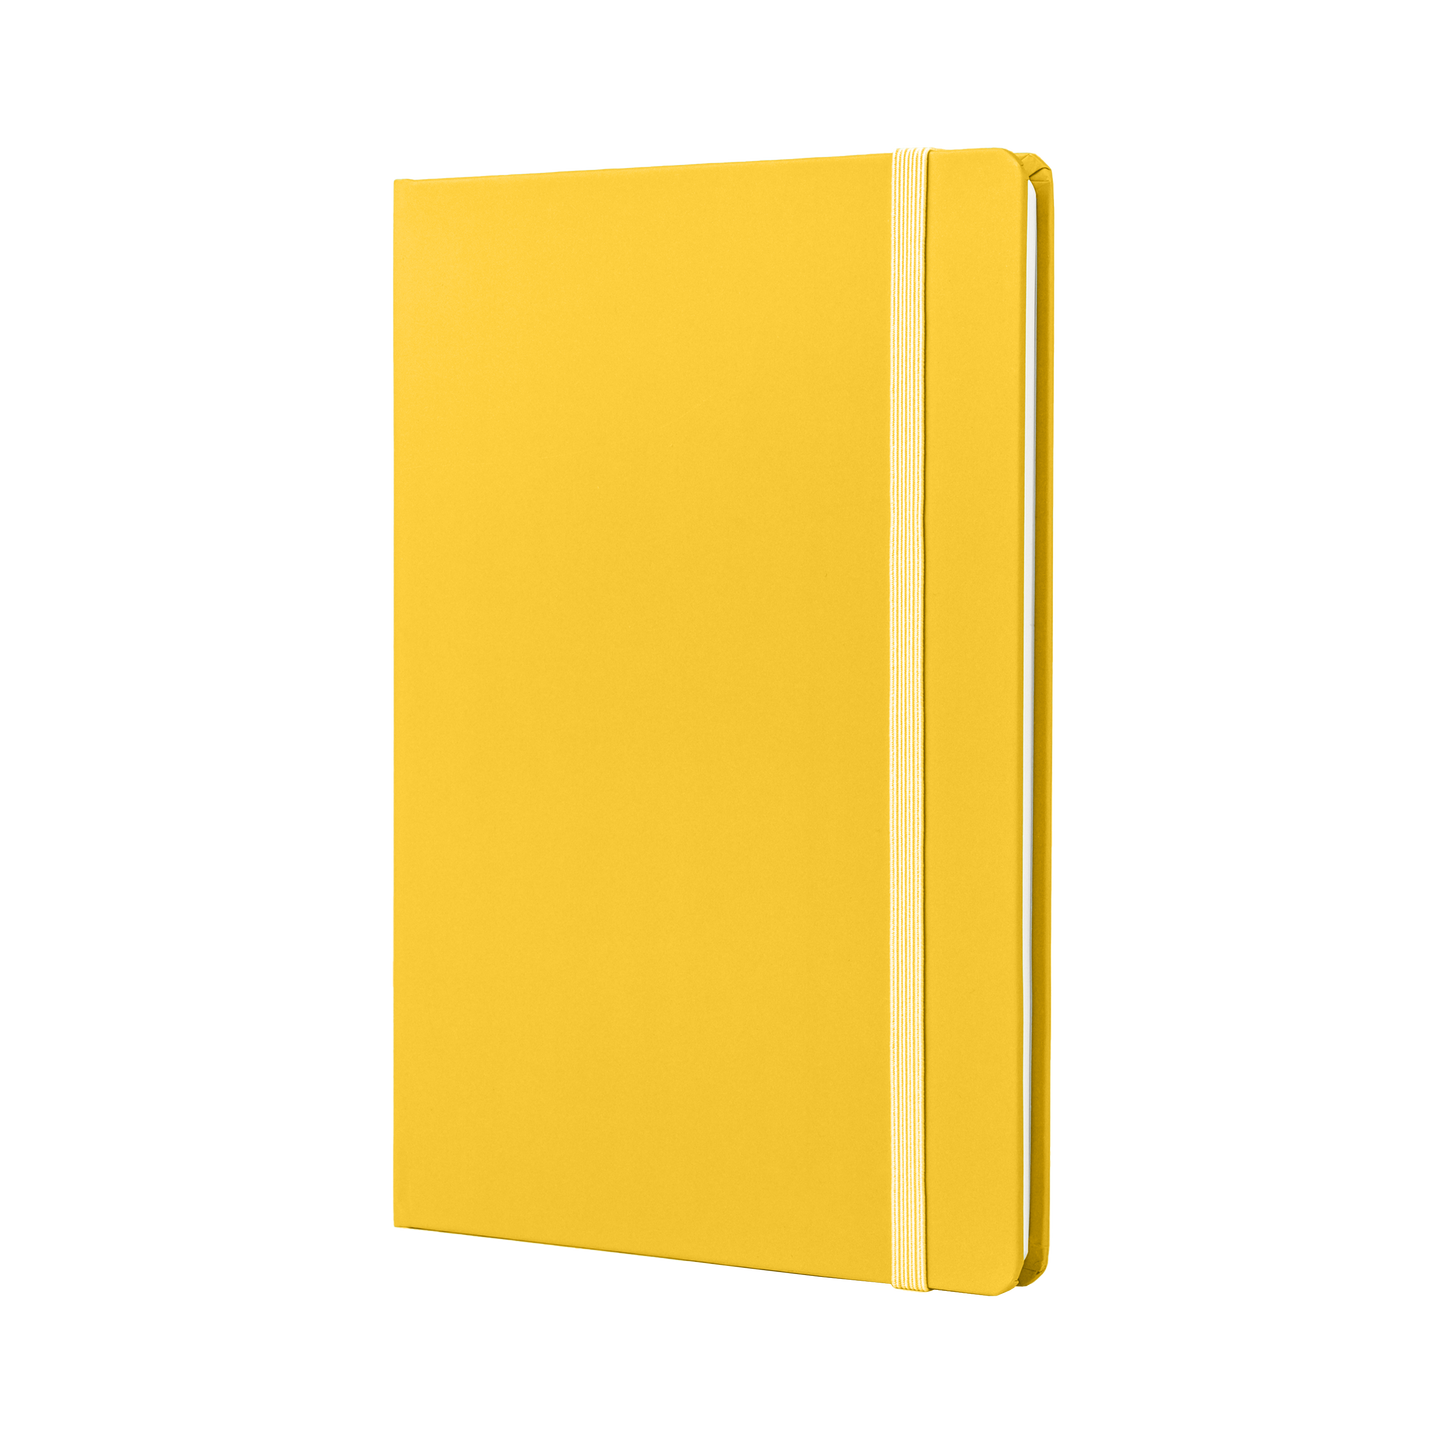 Moodler Ruled Notebook - Sun Kissed Yellow